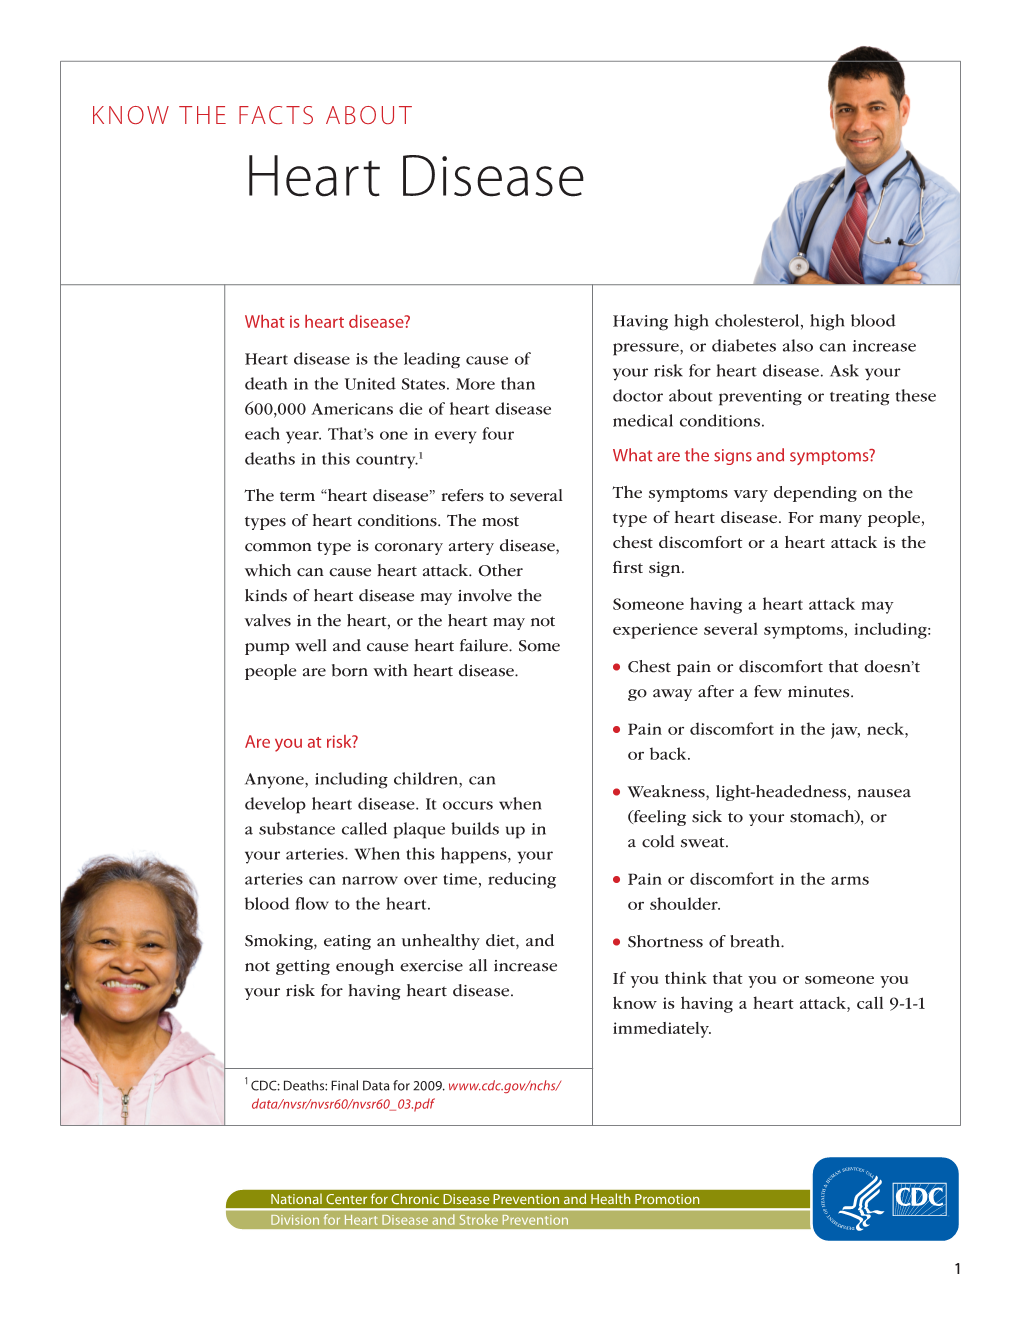 KNOW the FACTS ABOUT Heart Disease